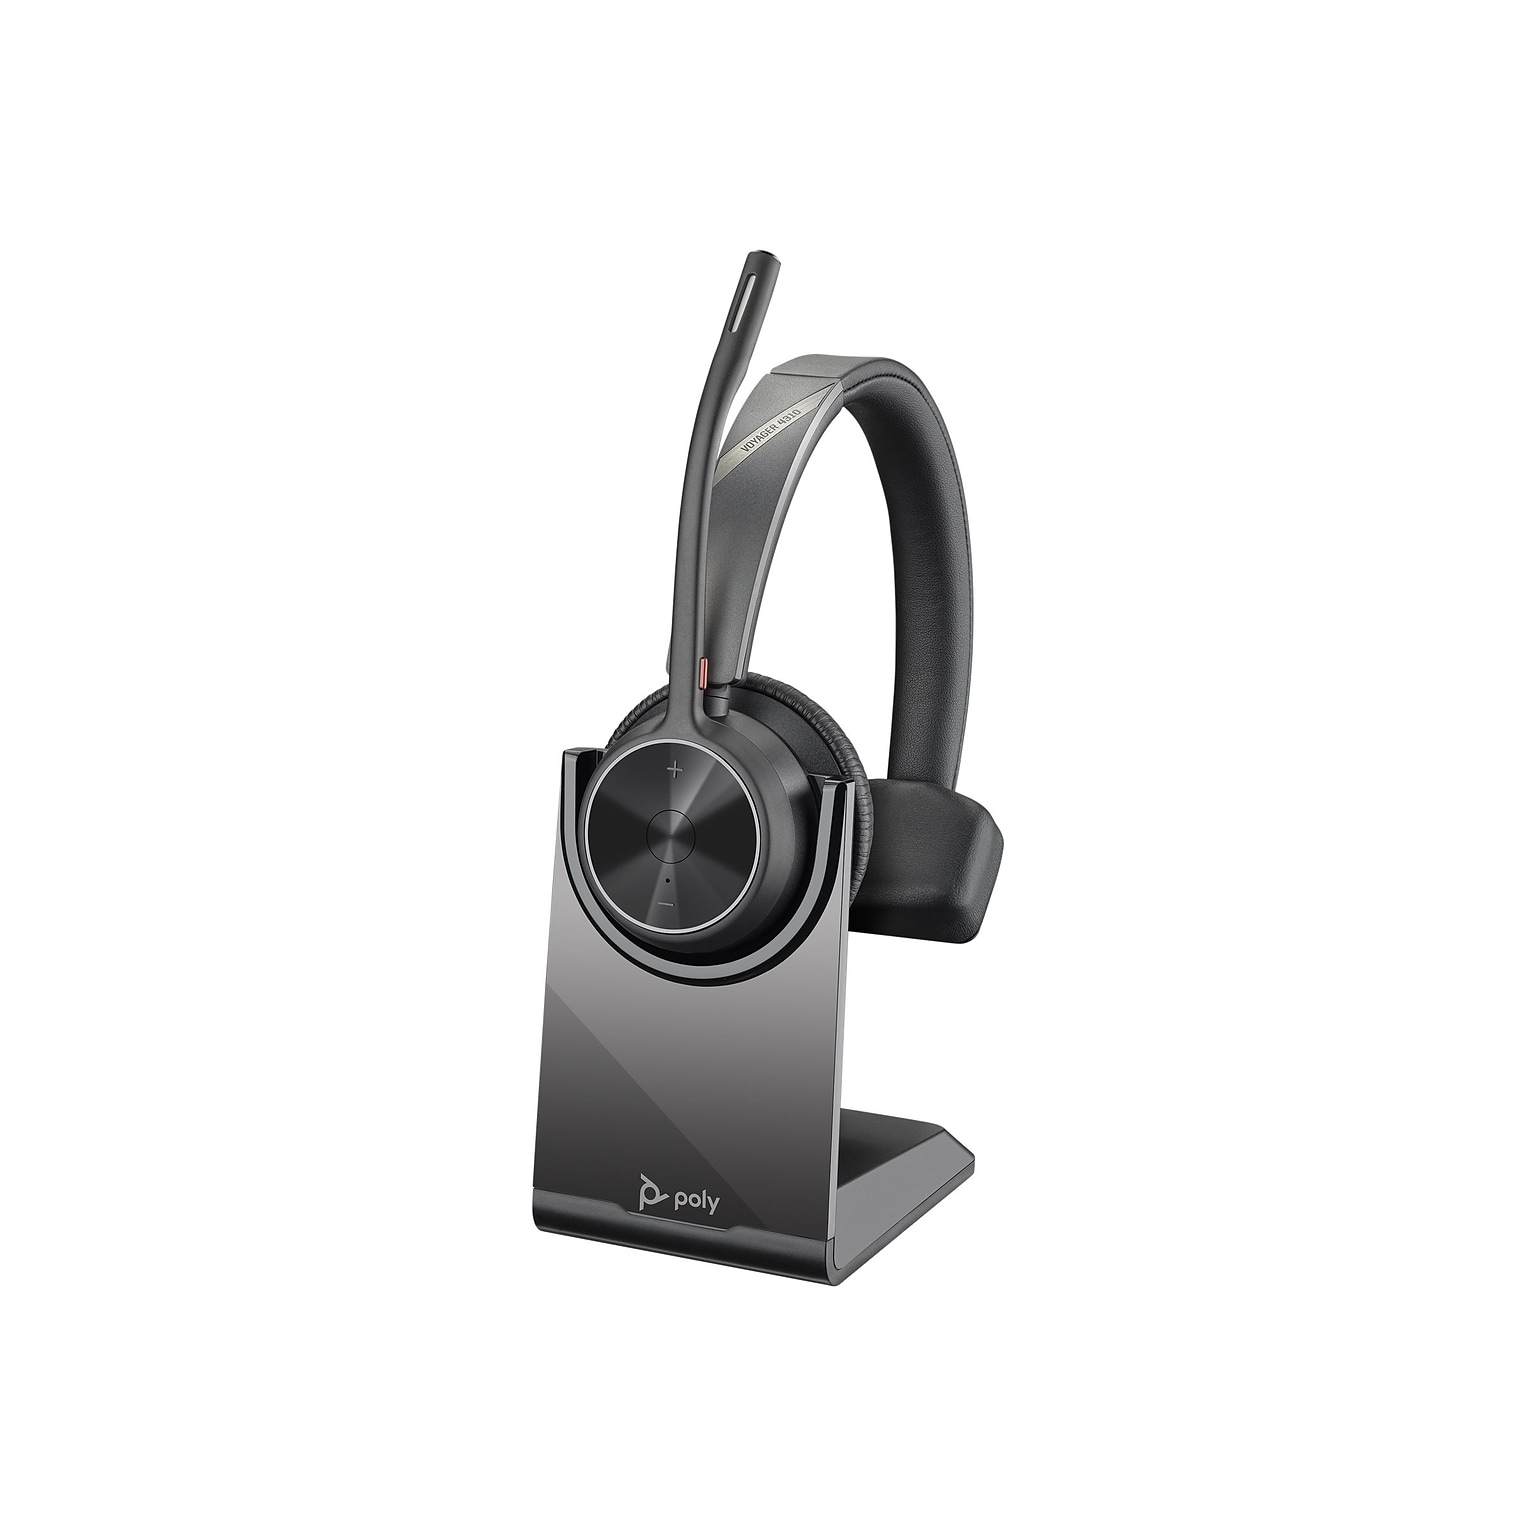 Plantronics Voyager 4310 UC Bluetooth On Ear Computer Headset, Black and Gray (218474-01)